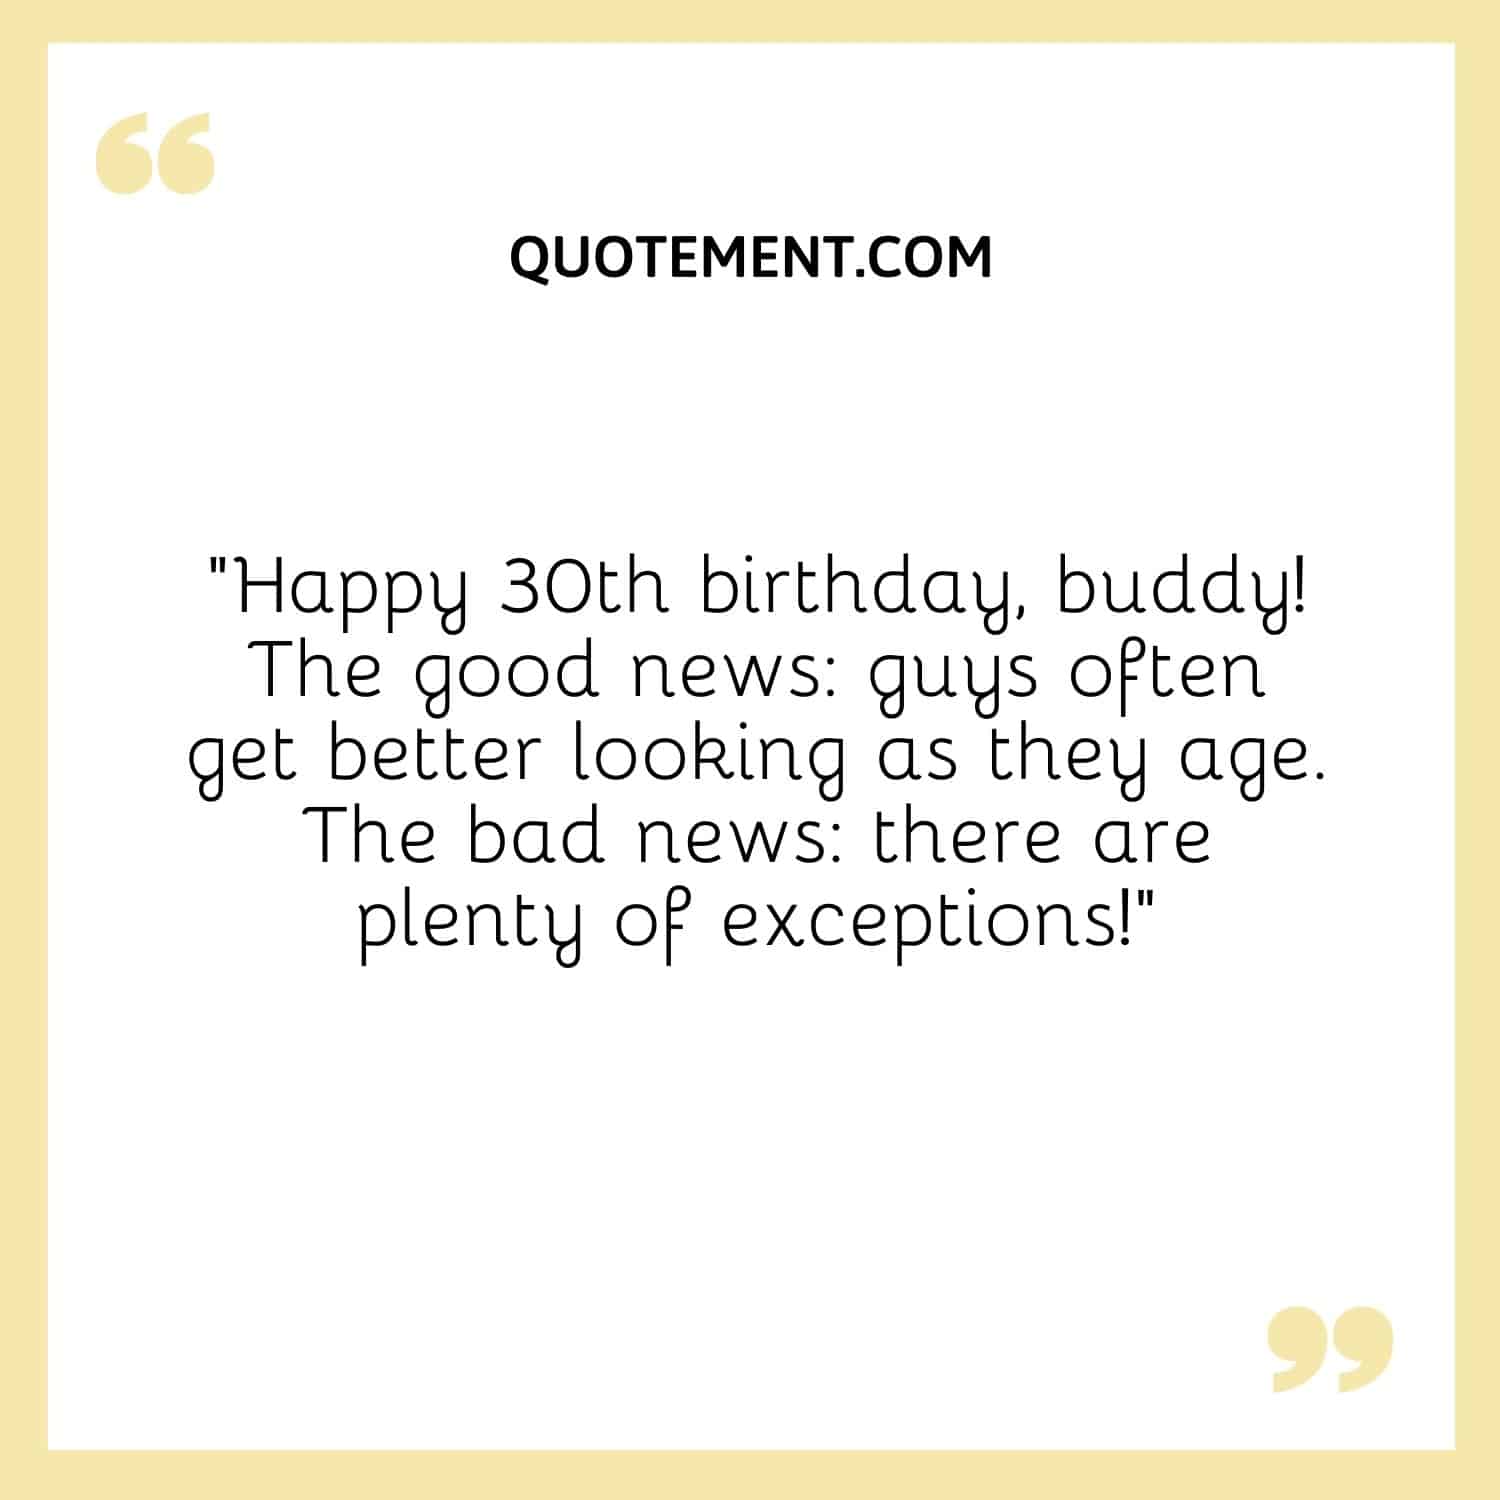 “Happy 30th birthday, buddy! The good news guys often get better looking as they age. The bad news there are plenty of exceptions!”